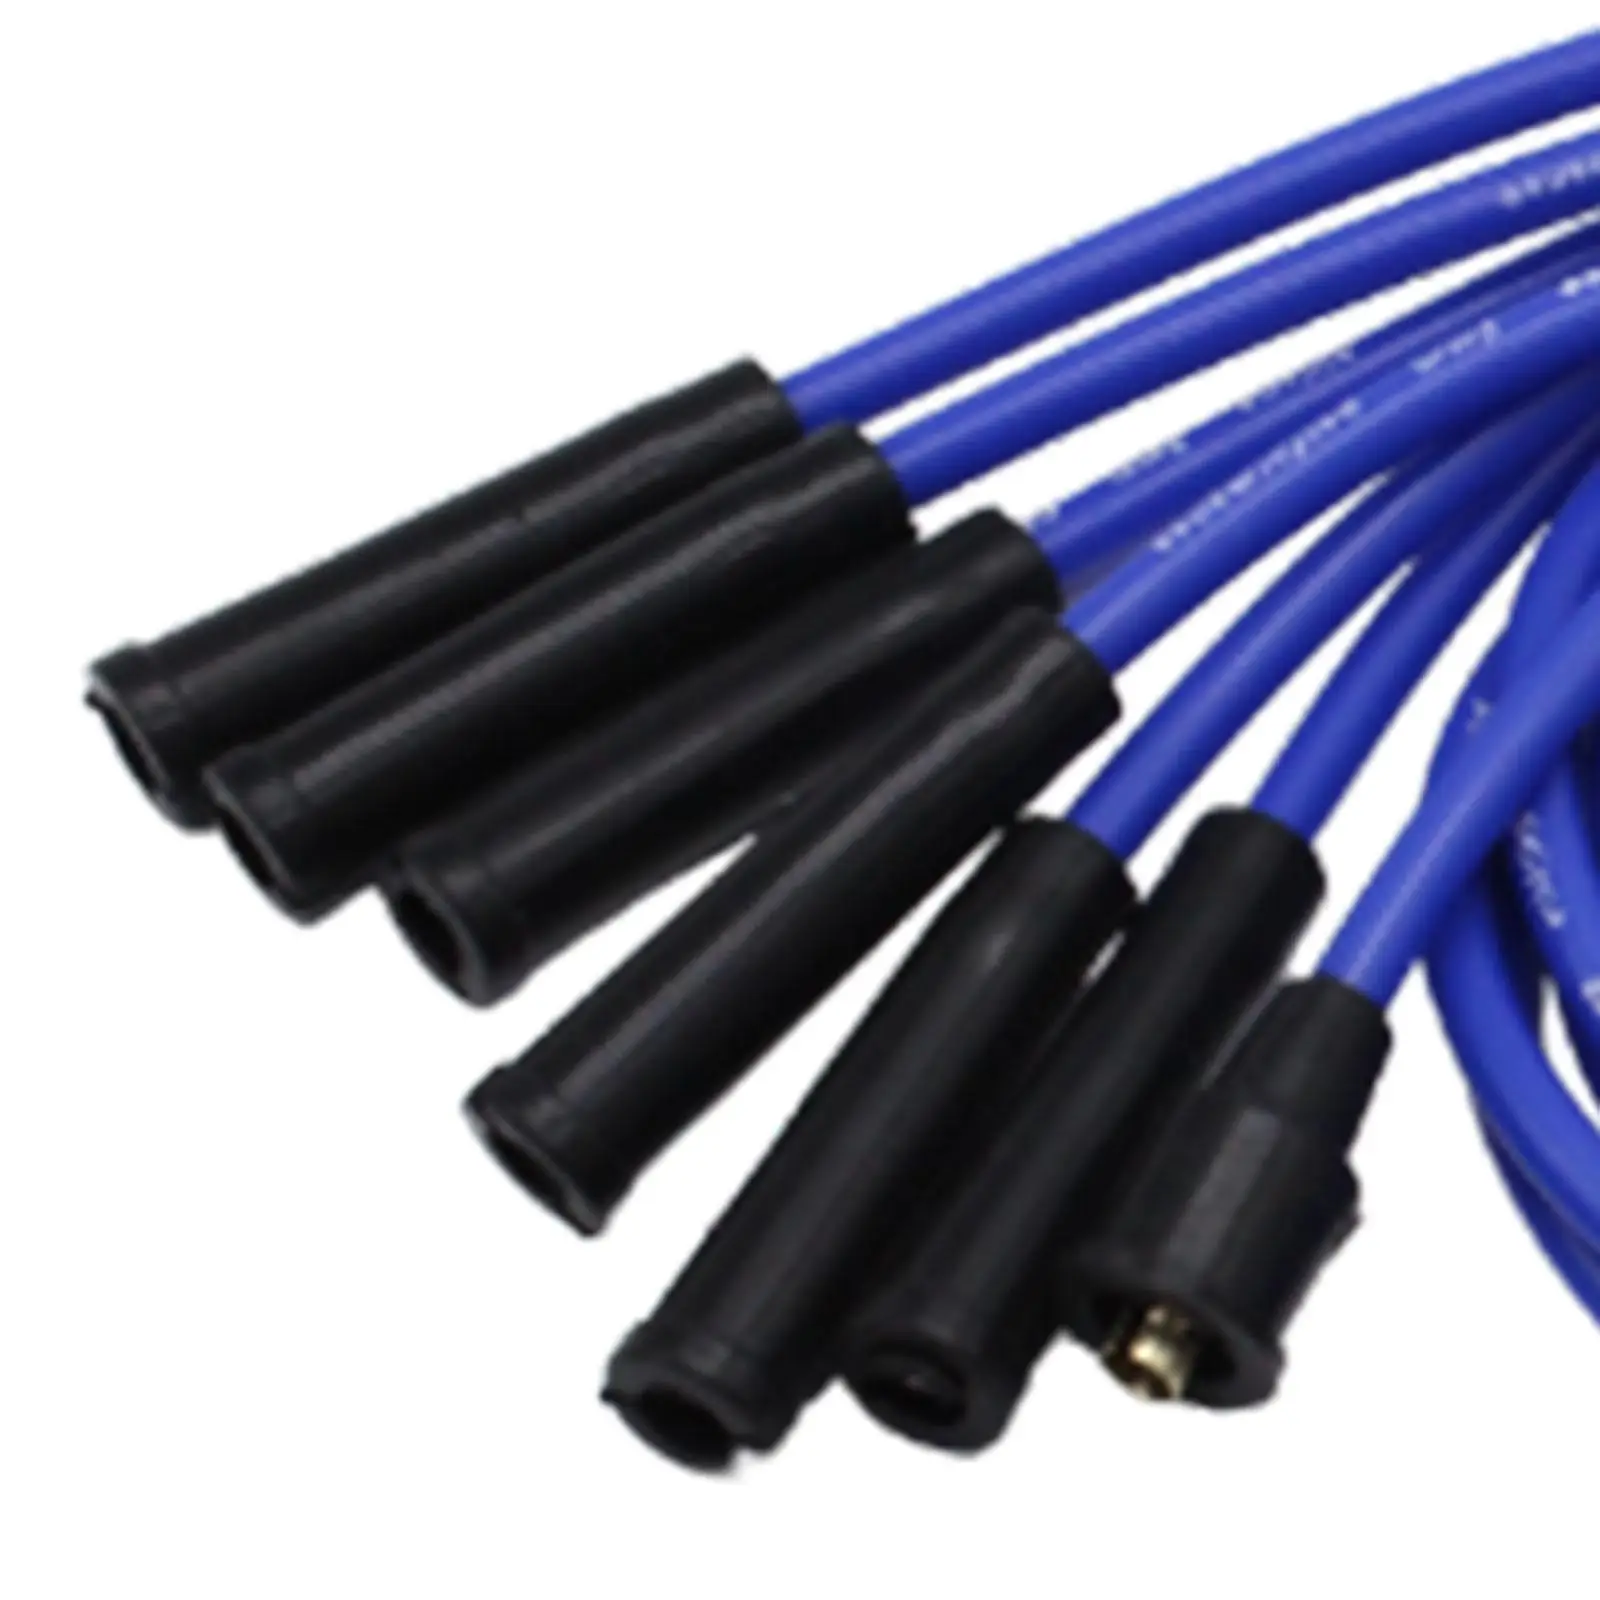 8mm HT Leads Ignition Cable for 6 Cylinder Classic Cars Accessories